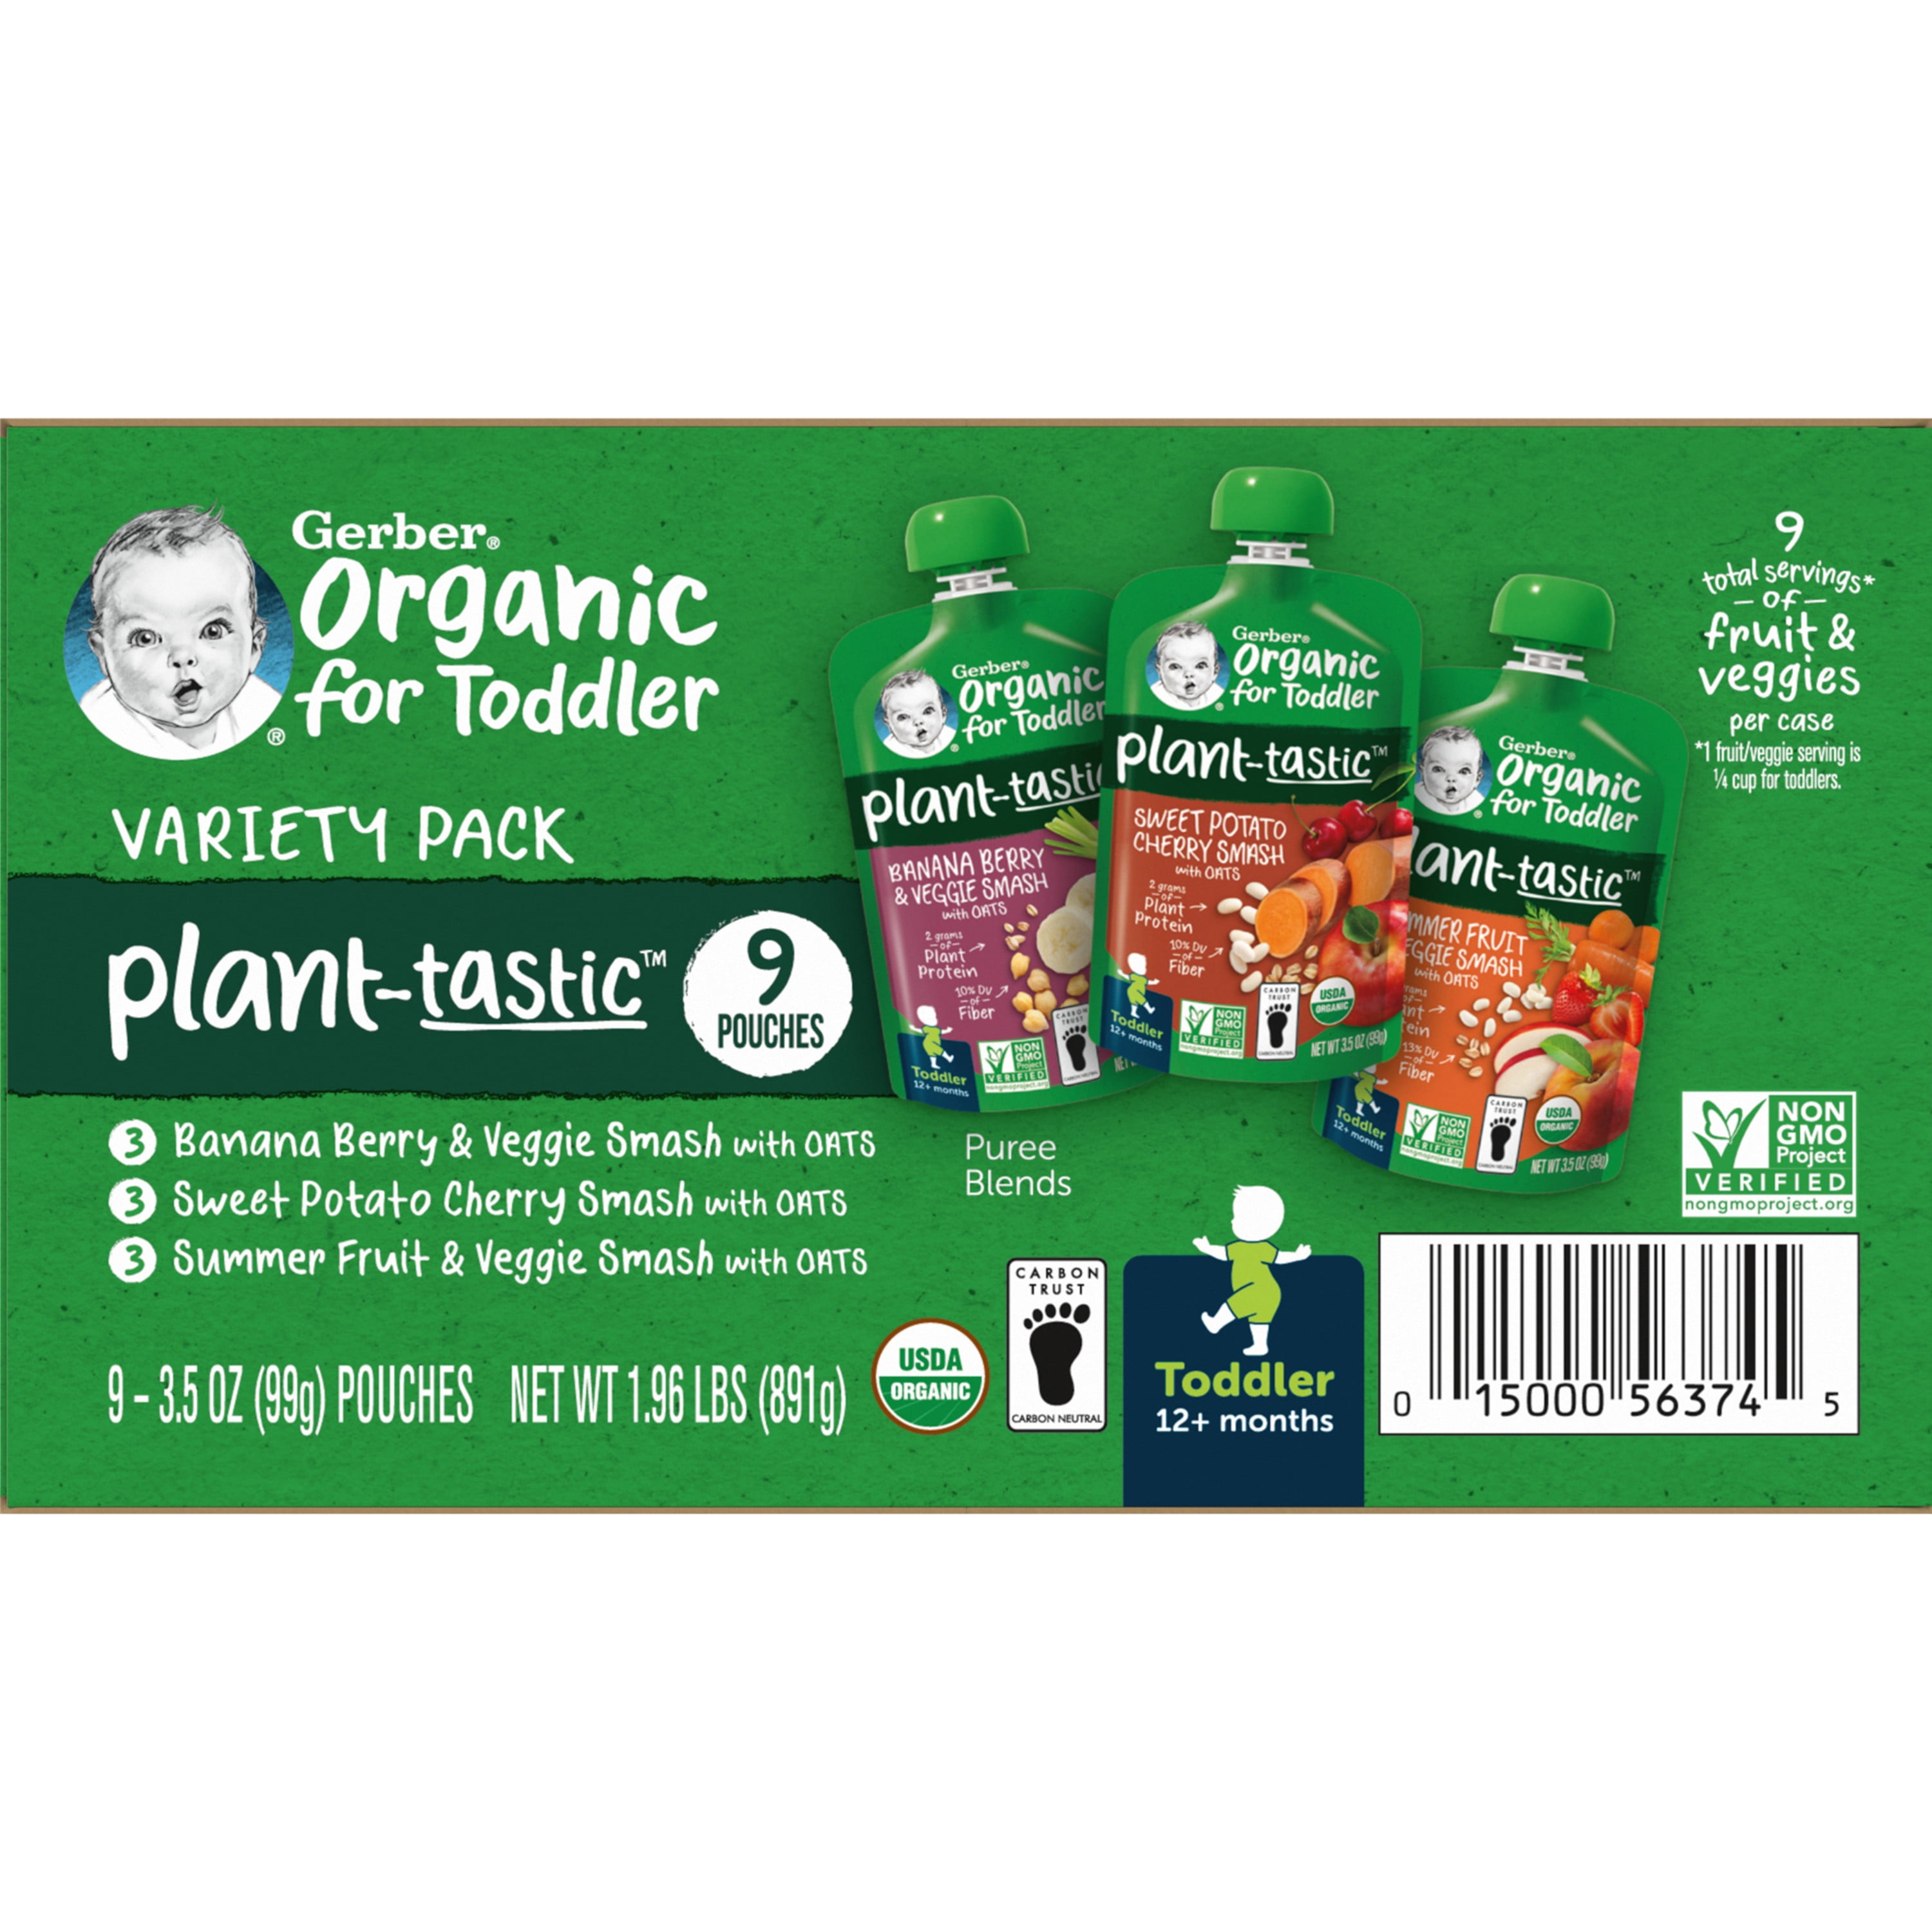 Gerber Organic Plant-tastic Toddler Food Variety Pack, 3.5 oz Pouches (9 Pack)